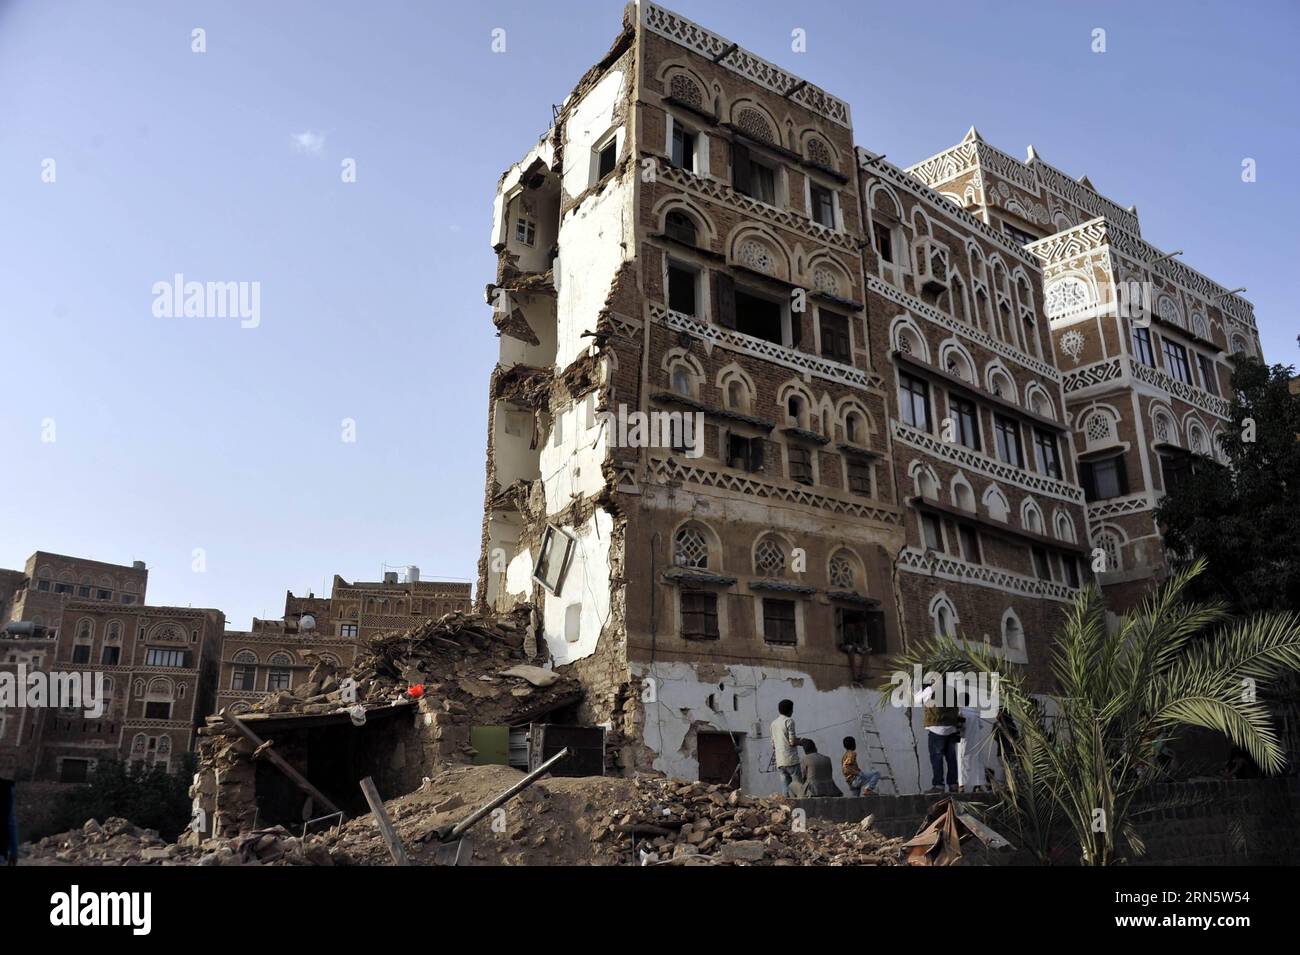 Yemenis stand near a historical building destroyed by the airstrike of Saudi-led coaltion forces in the Old City of Sanaa in Sanaa, Yemen, on July 3, 2015. The United Nations Educational, Scientific and Cultural Organization (UNESCO) World Heritage Committee on July 2 added two sites in Yemen on the List of World Heritage in Danger: the Old City of Sanaa and the Old Walled City of Shibam.) YEMEN-SANAA-WORLD HERITAGE IN DANGER HanixAli PUBLICATIONxNOTxINxCHN   Yemenis stand Near a Historical Building destroyed by The airstrike of Saudi Led Coaltion Forces in The Old City of Sanaa in Sanaa Yemen Stock Photo